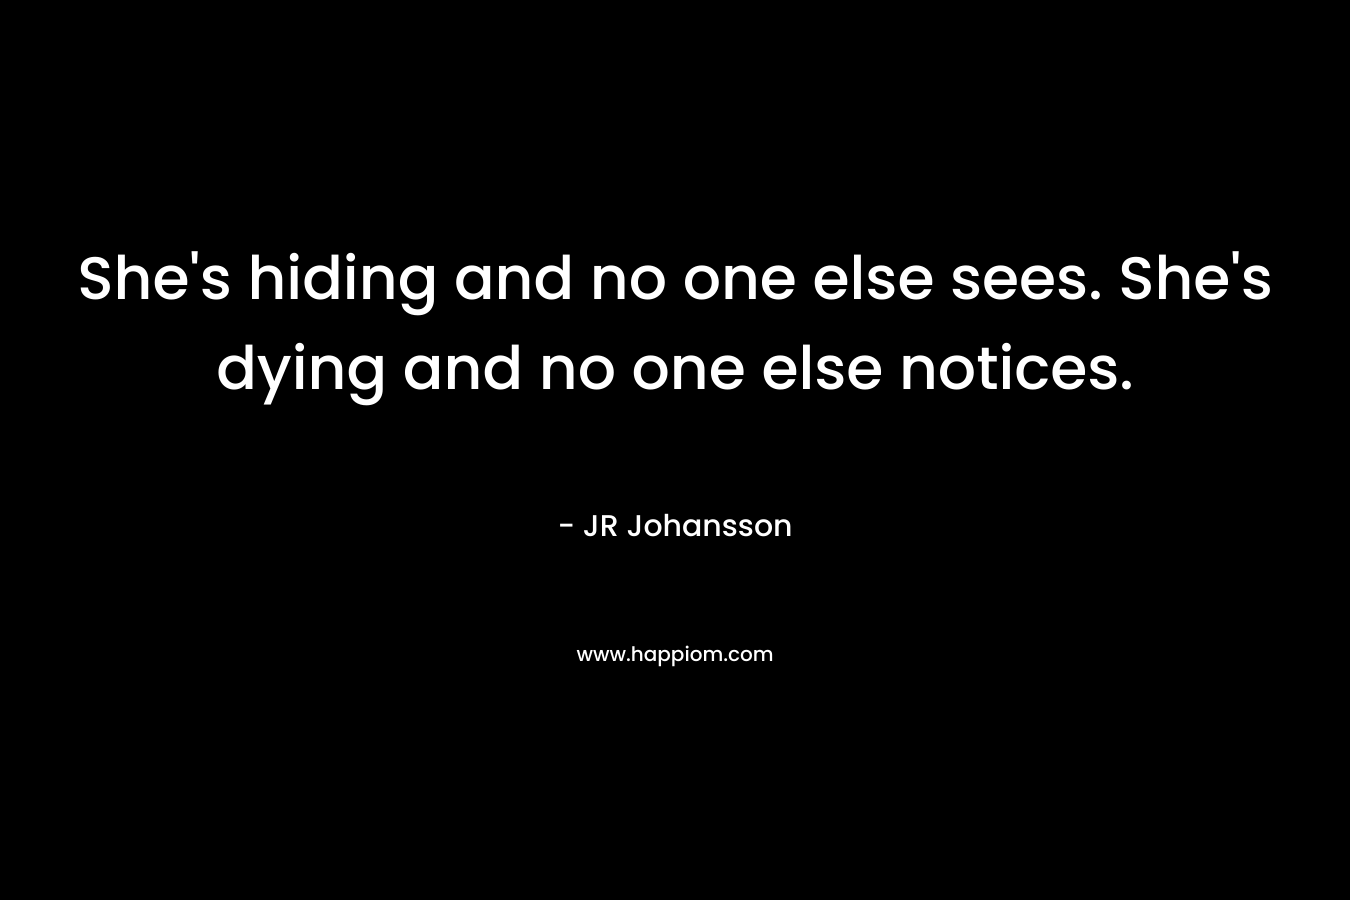 She’s hiding and no one else sees. She’s dying and no one else notices. – JR Johansson